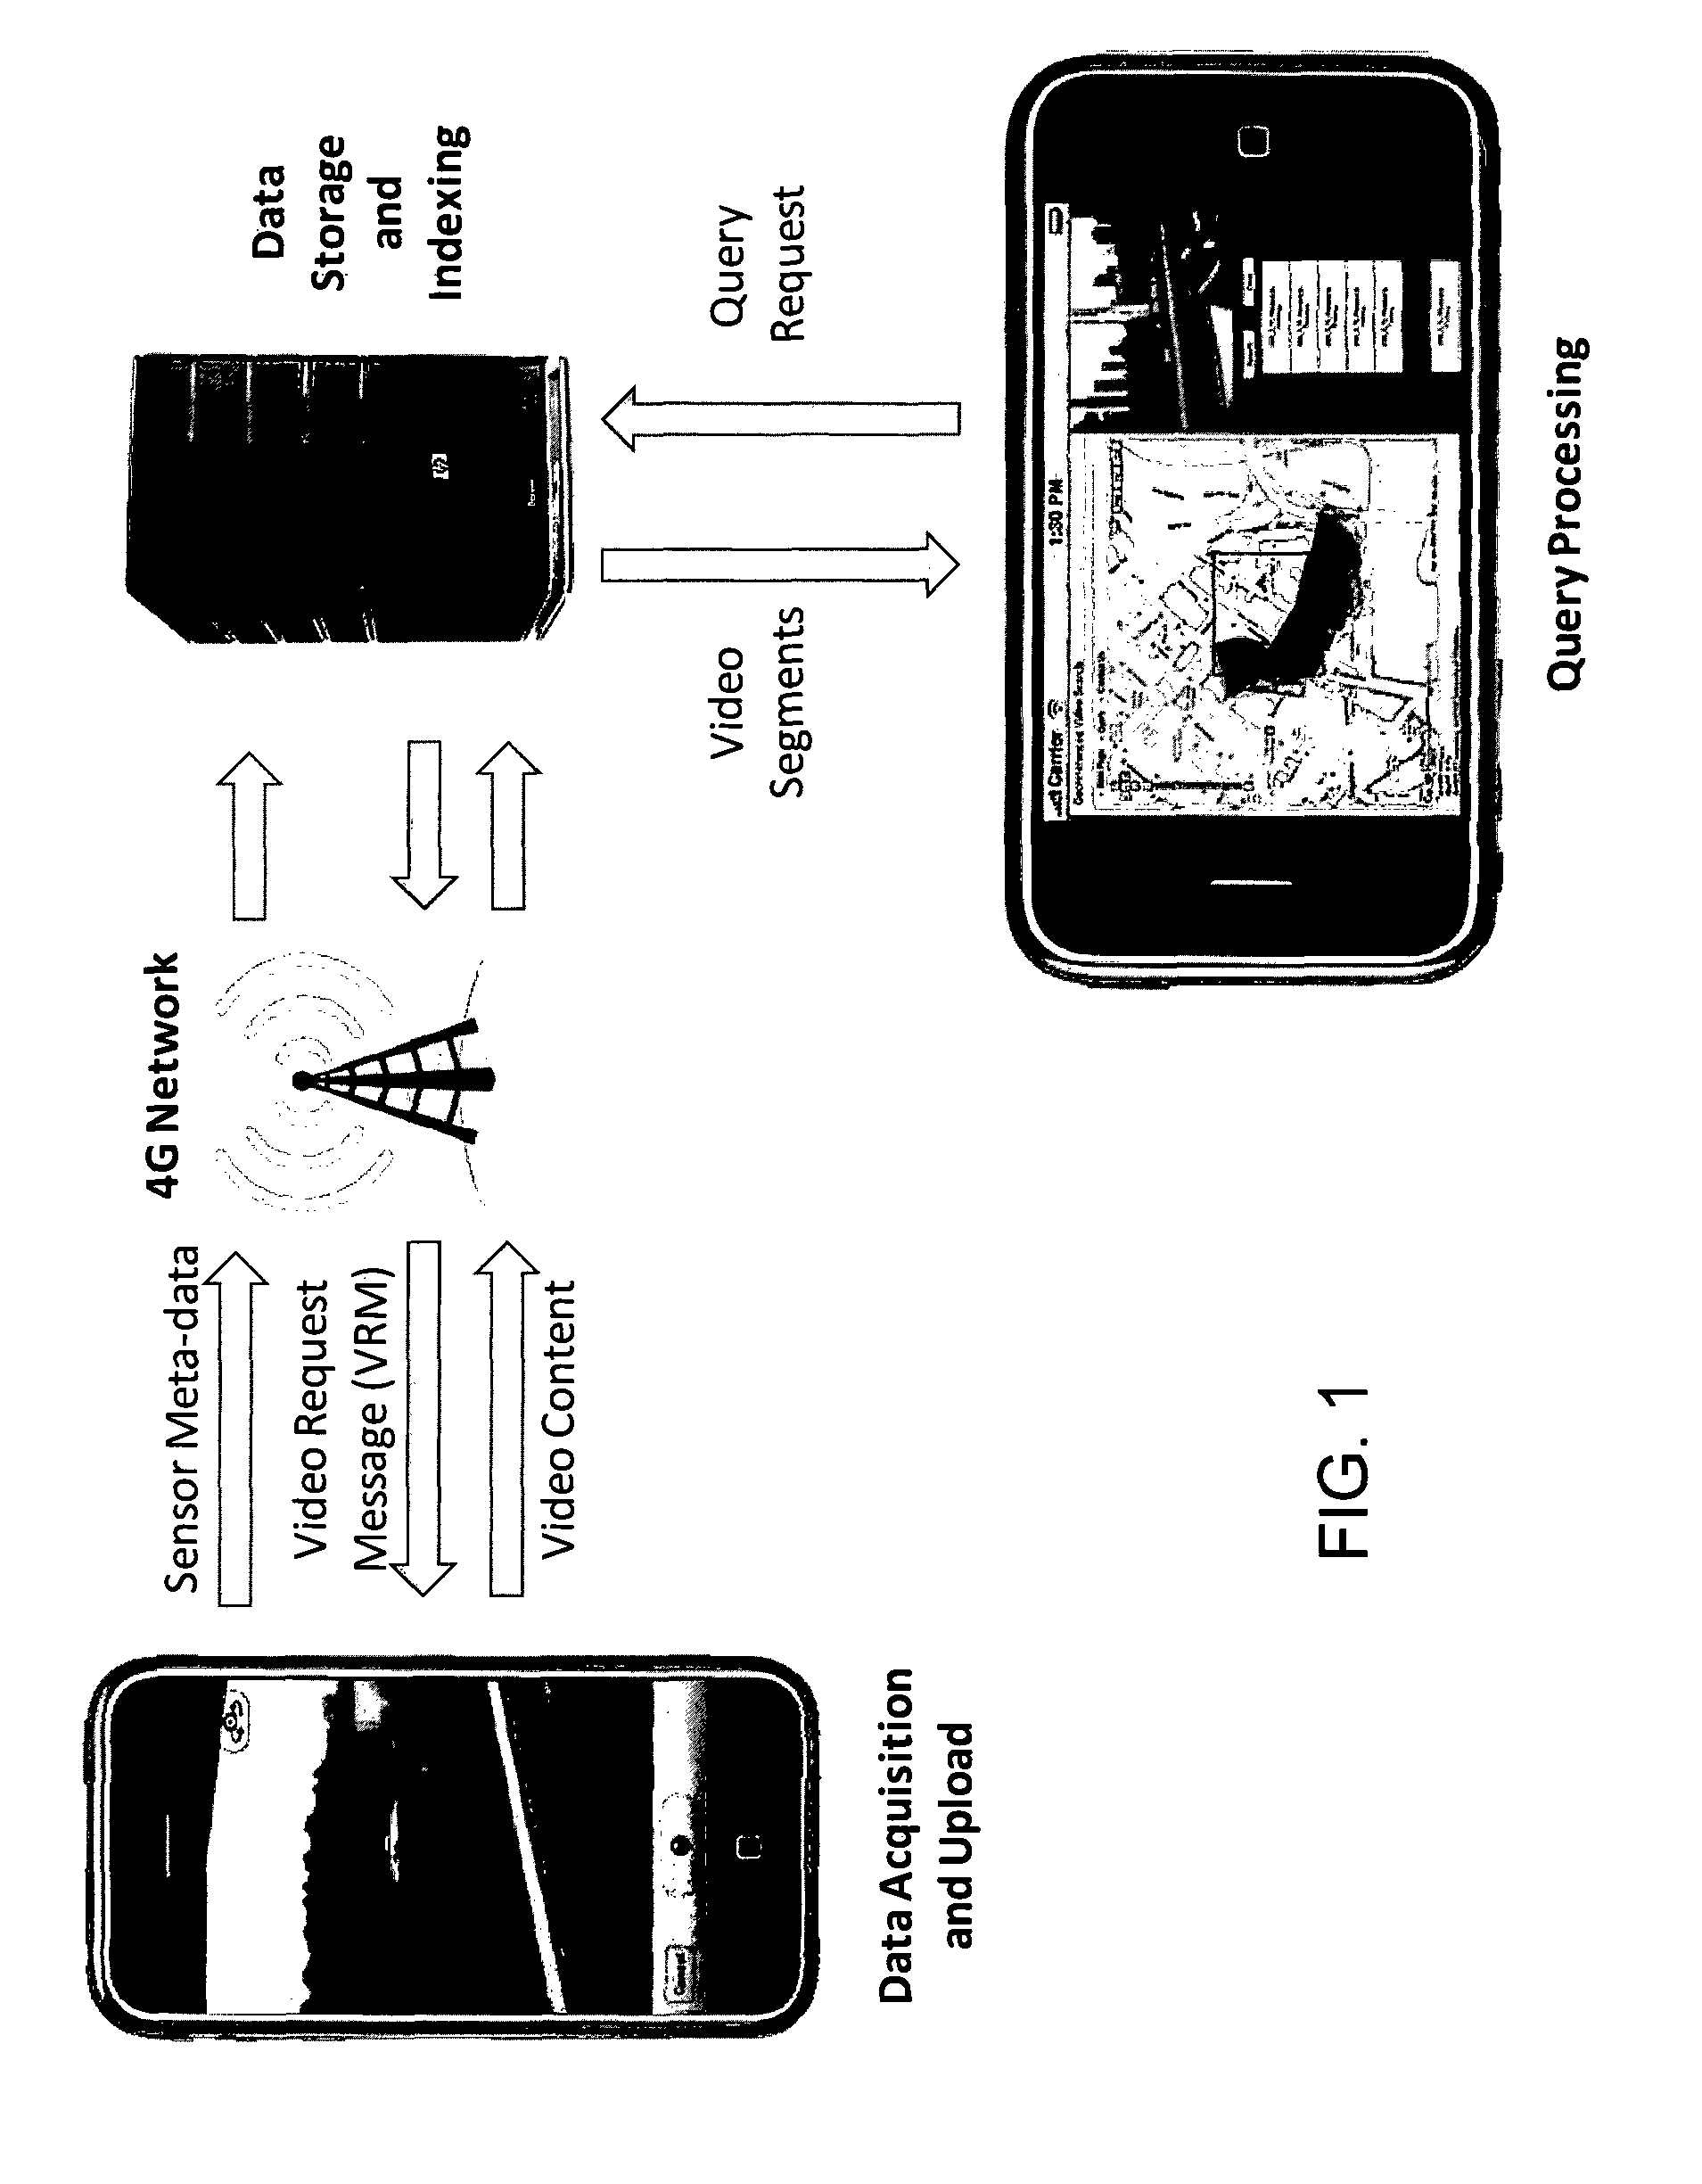 Apparatus, system, and method for annotation of media files with sensor data